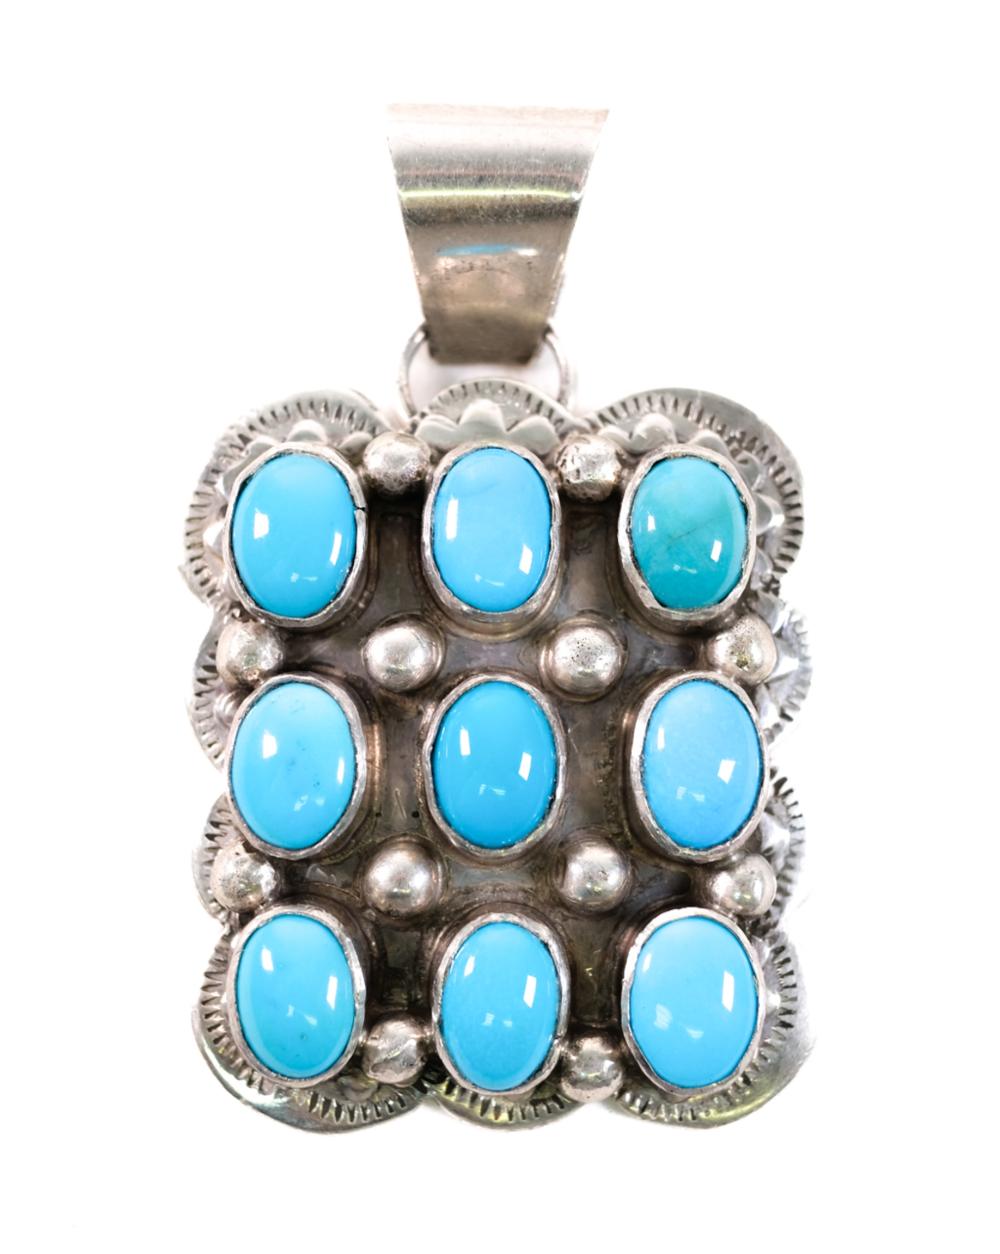 VINTAGE STERLING SILVER & TURQUOISE